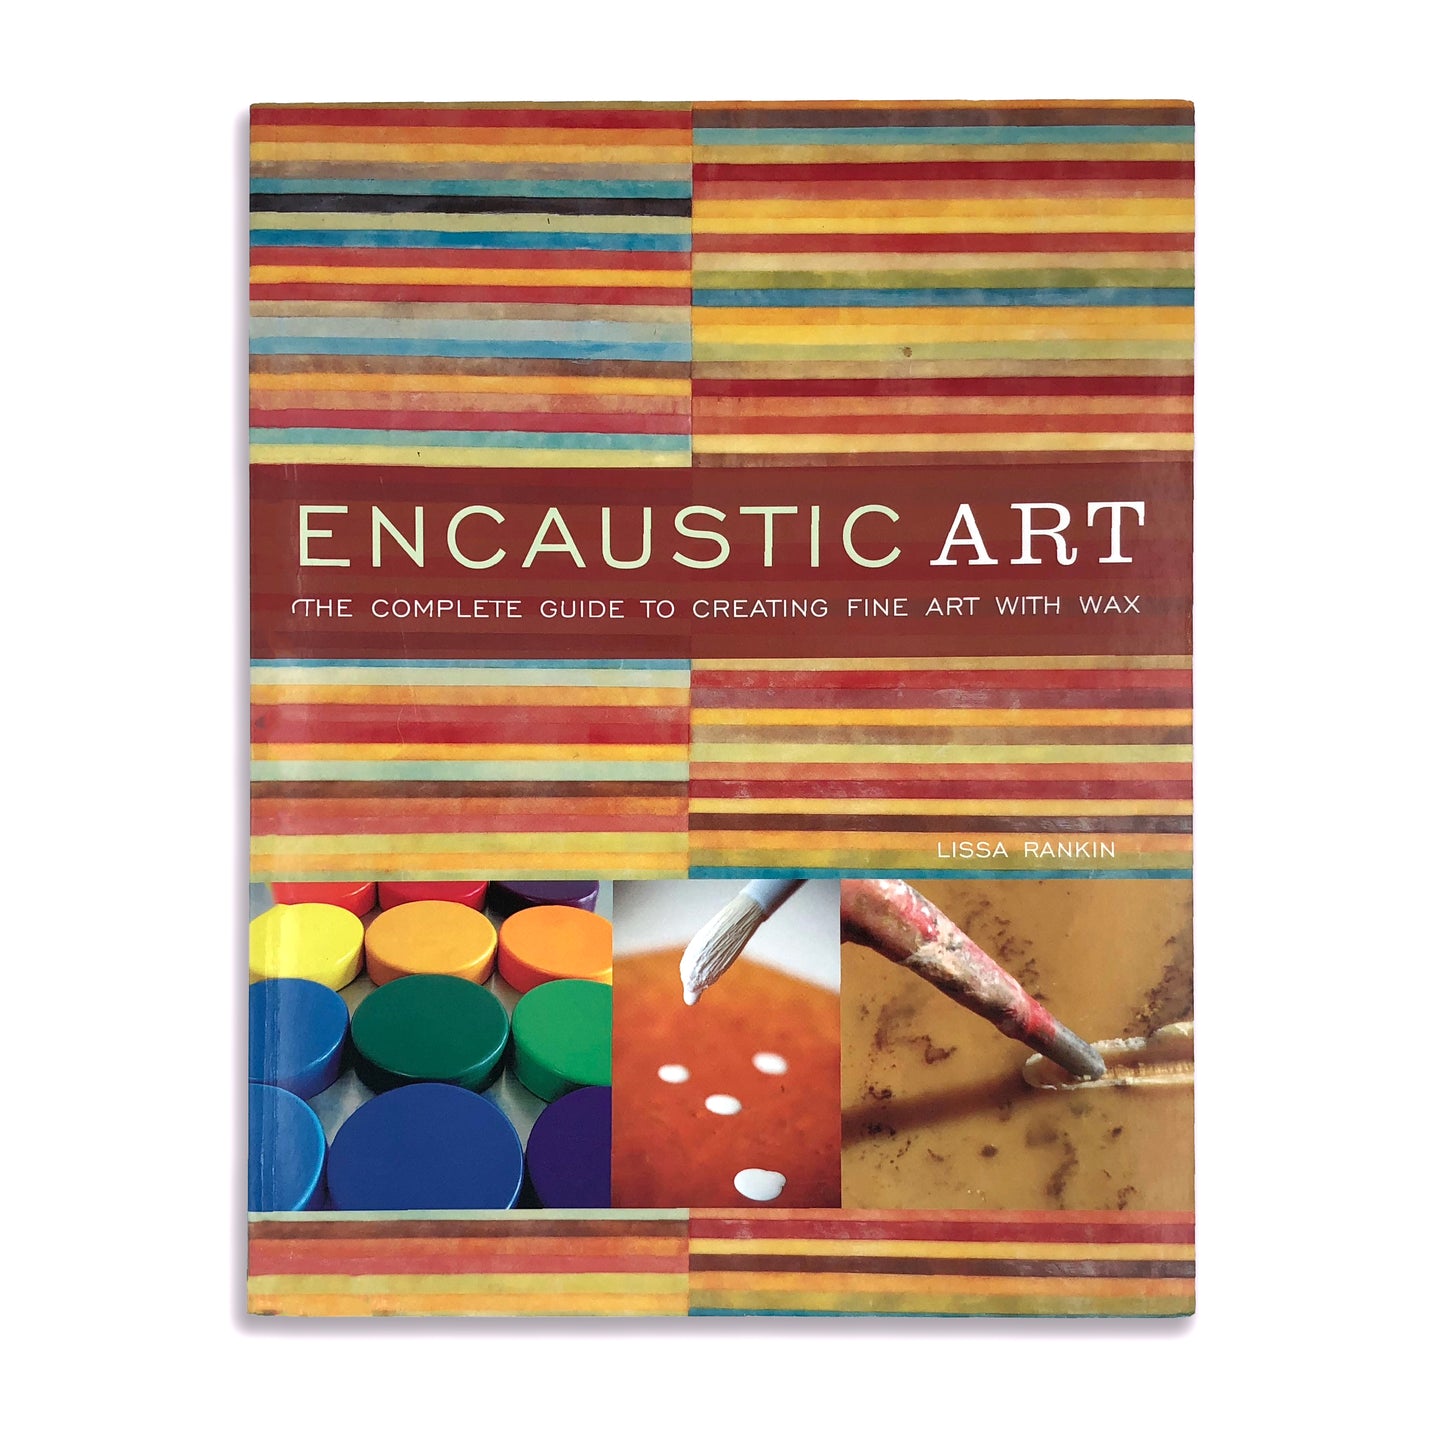 Encaustic Art: The Complete Guide to Creating Fine Art with Wax - Lissa Rankin (paperback)